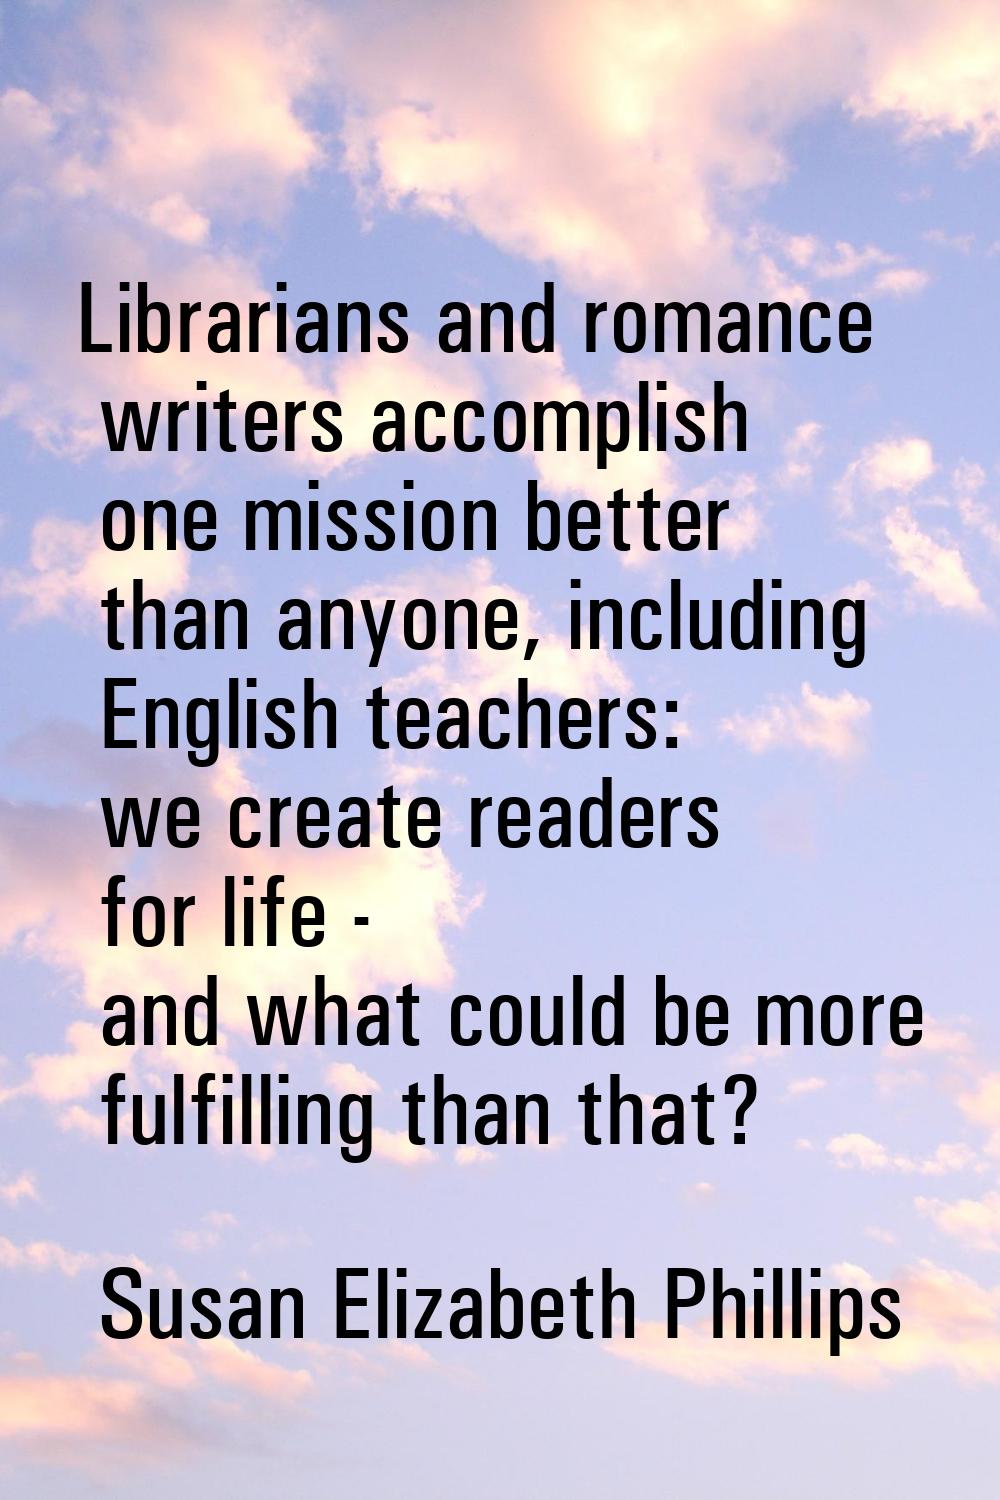 Librarians and romance writers accomplish one mission better than anyone, including English teacher